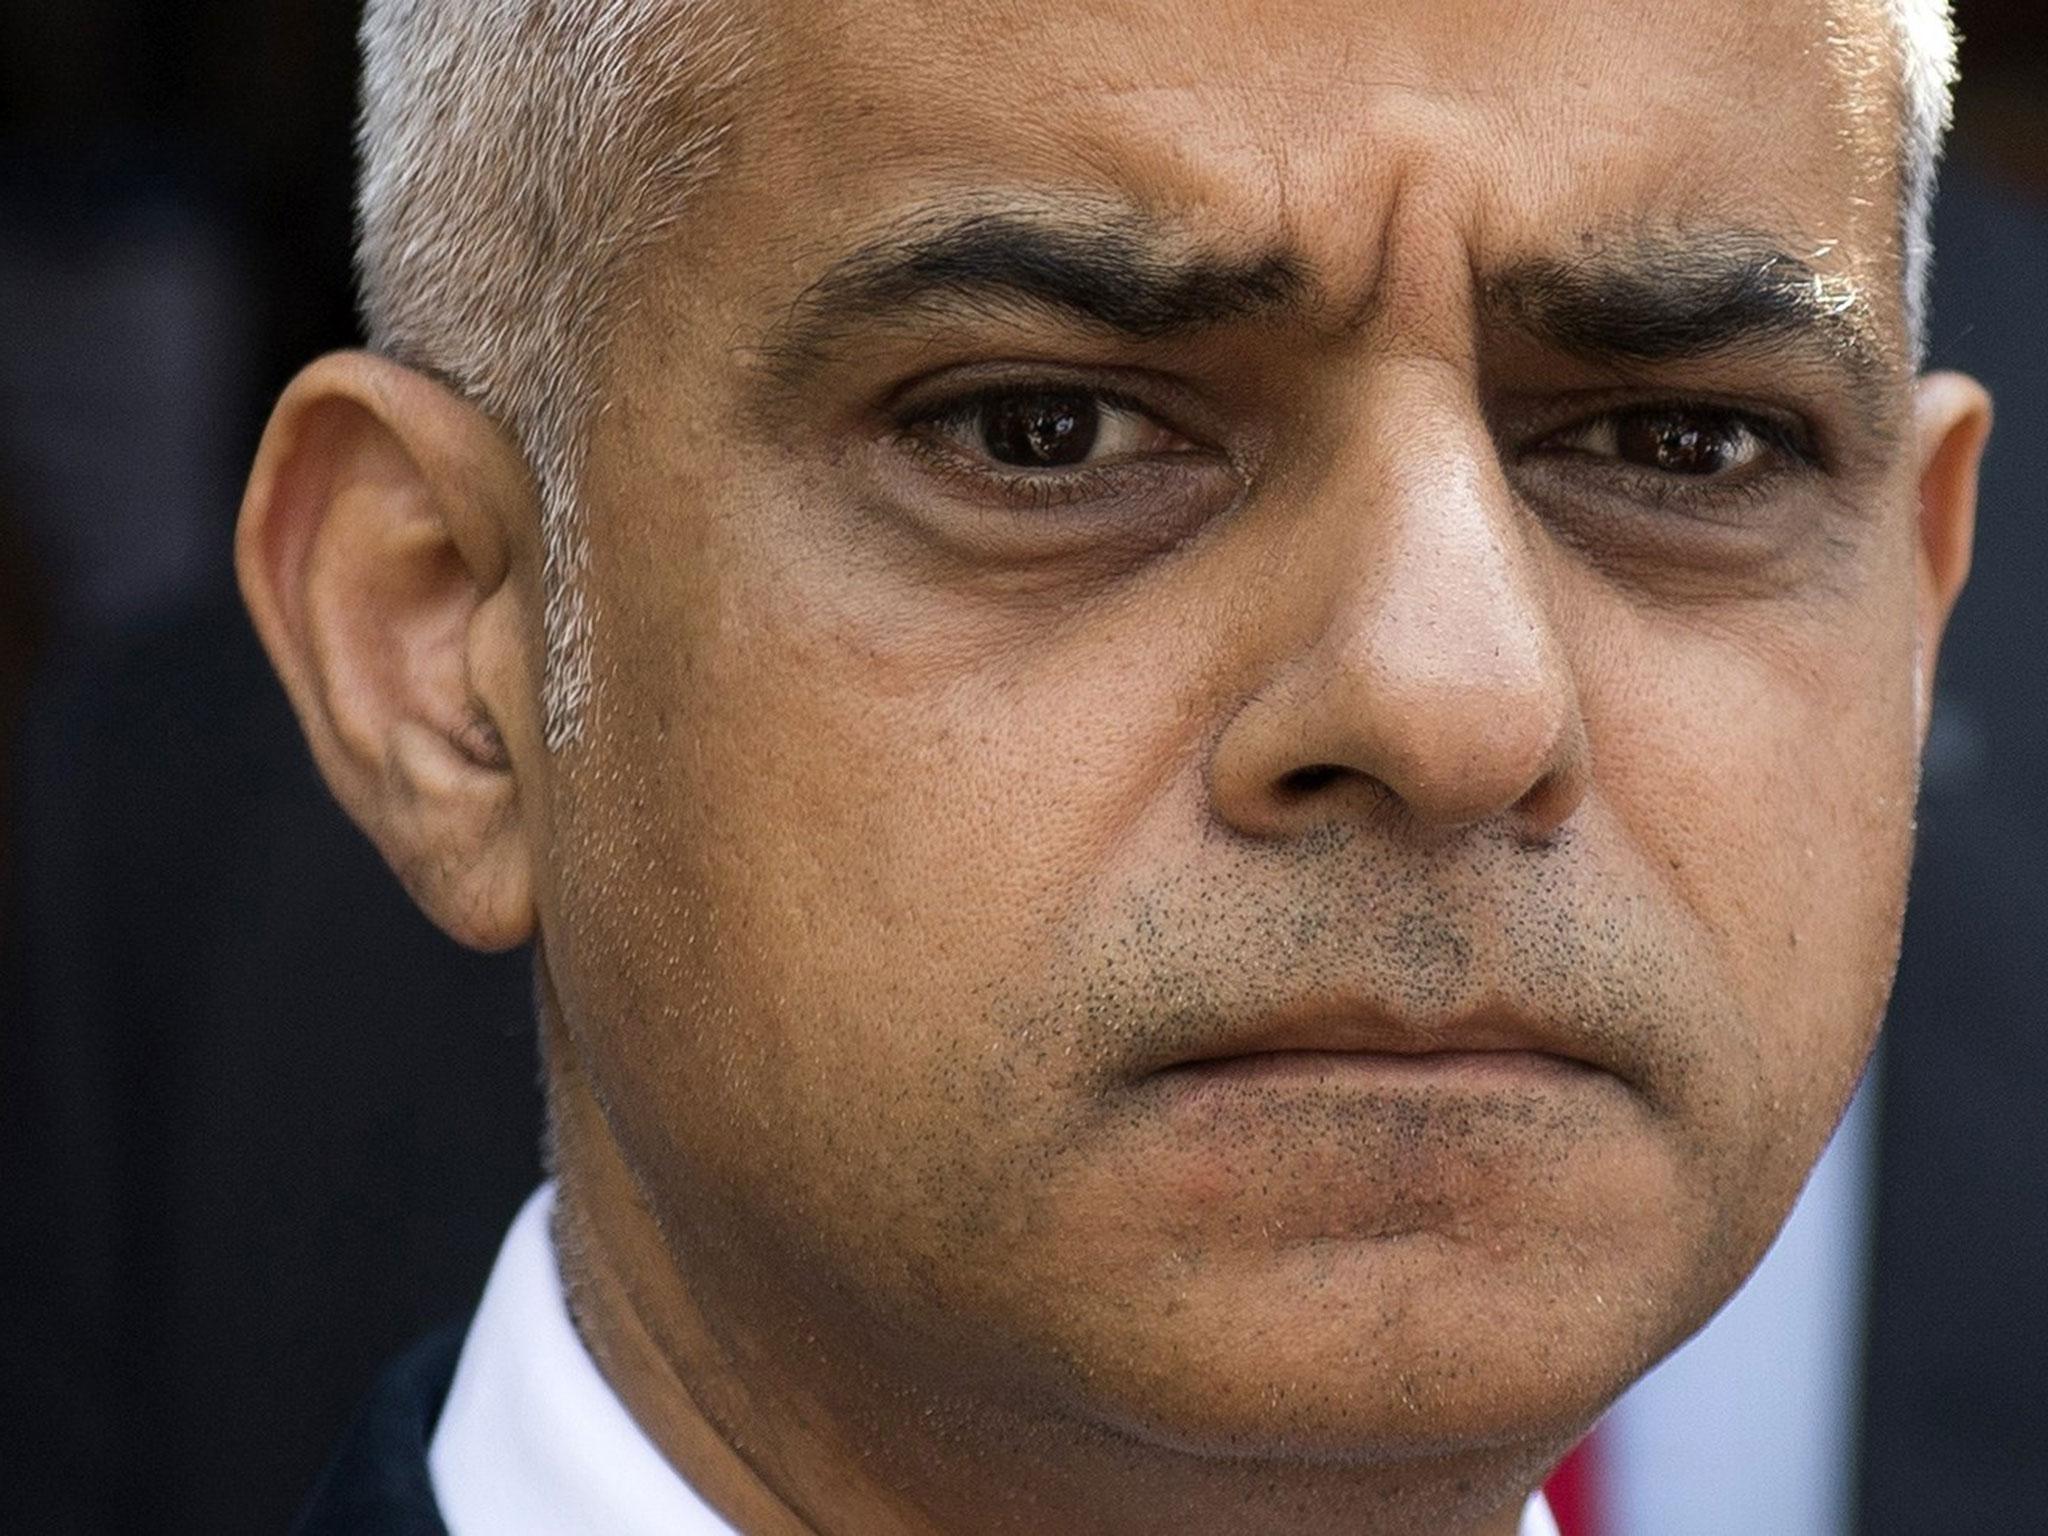 Mr Khan warned social media sites to remove violent content that glorifies knife crime, saying their current policies 'do not go far enough'